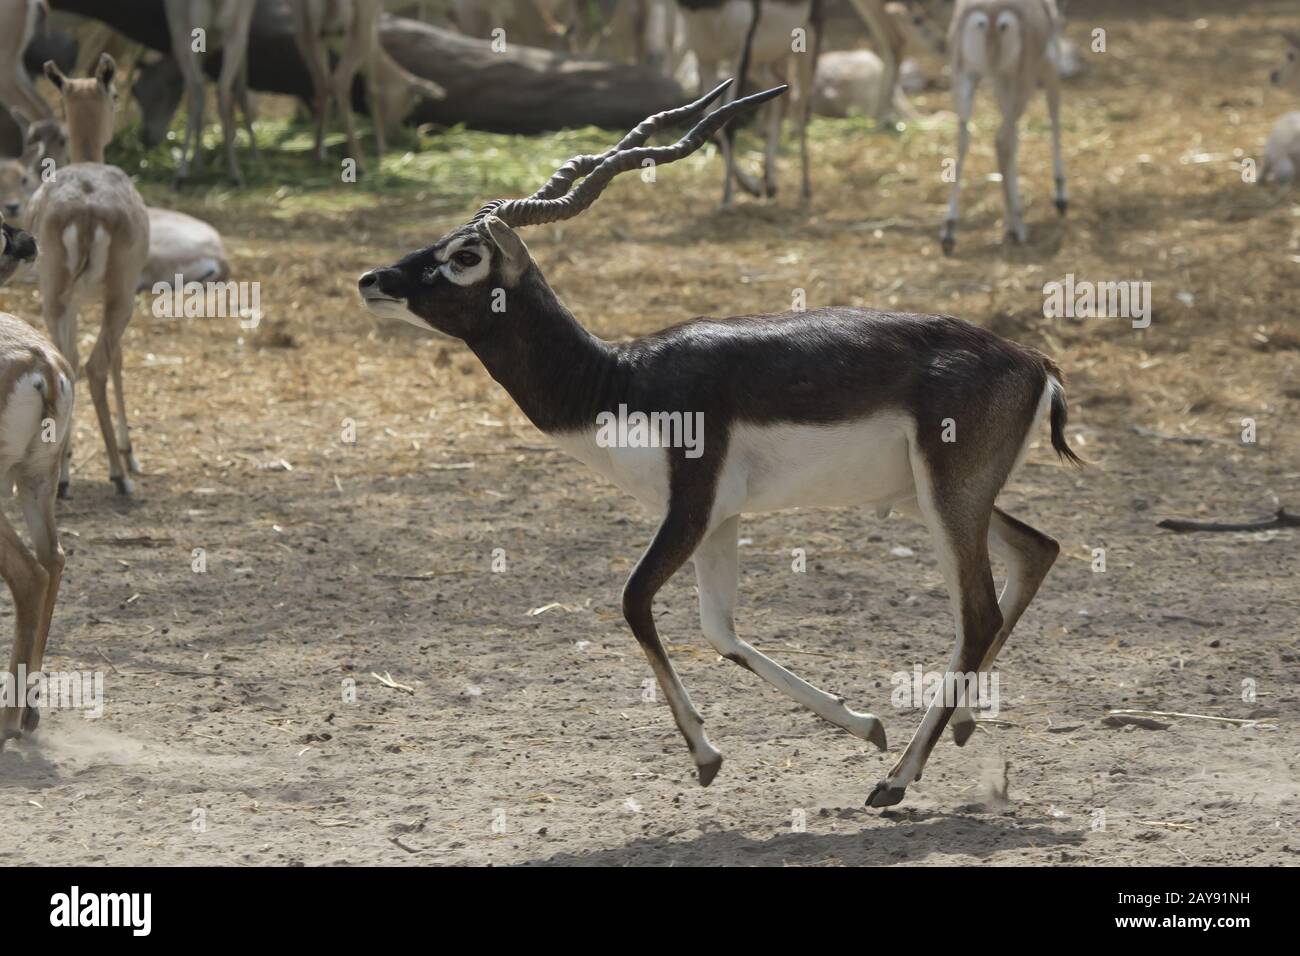 male blackbuck or Indian antelopey who runs around the herd in the zoo enclosure Stock Photo